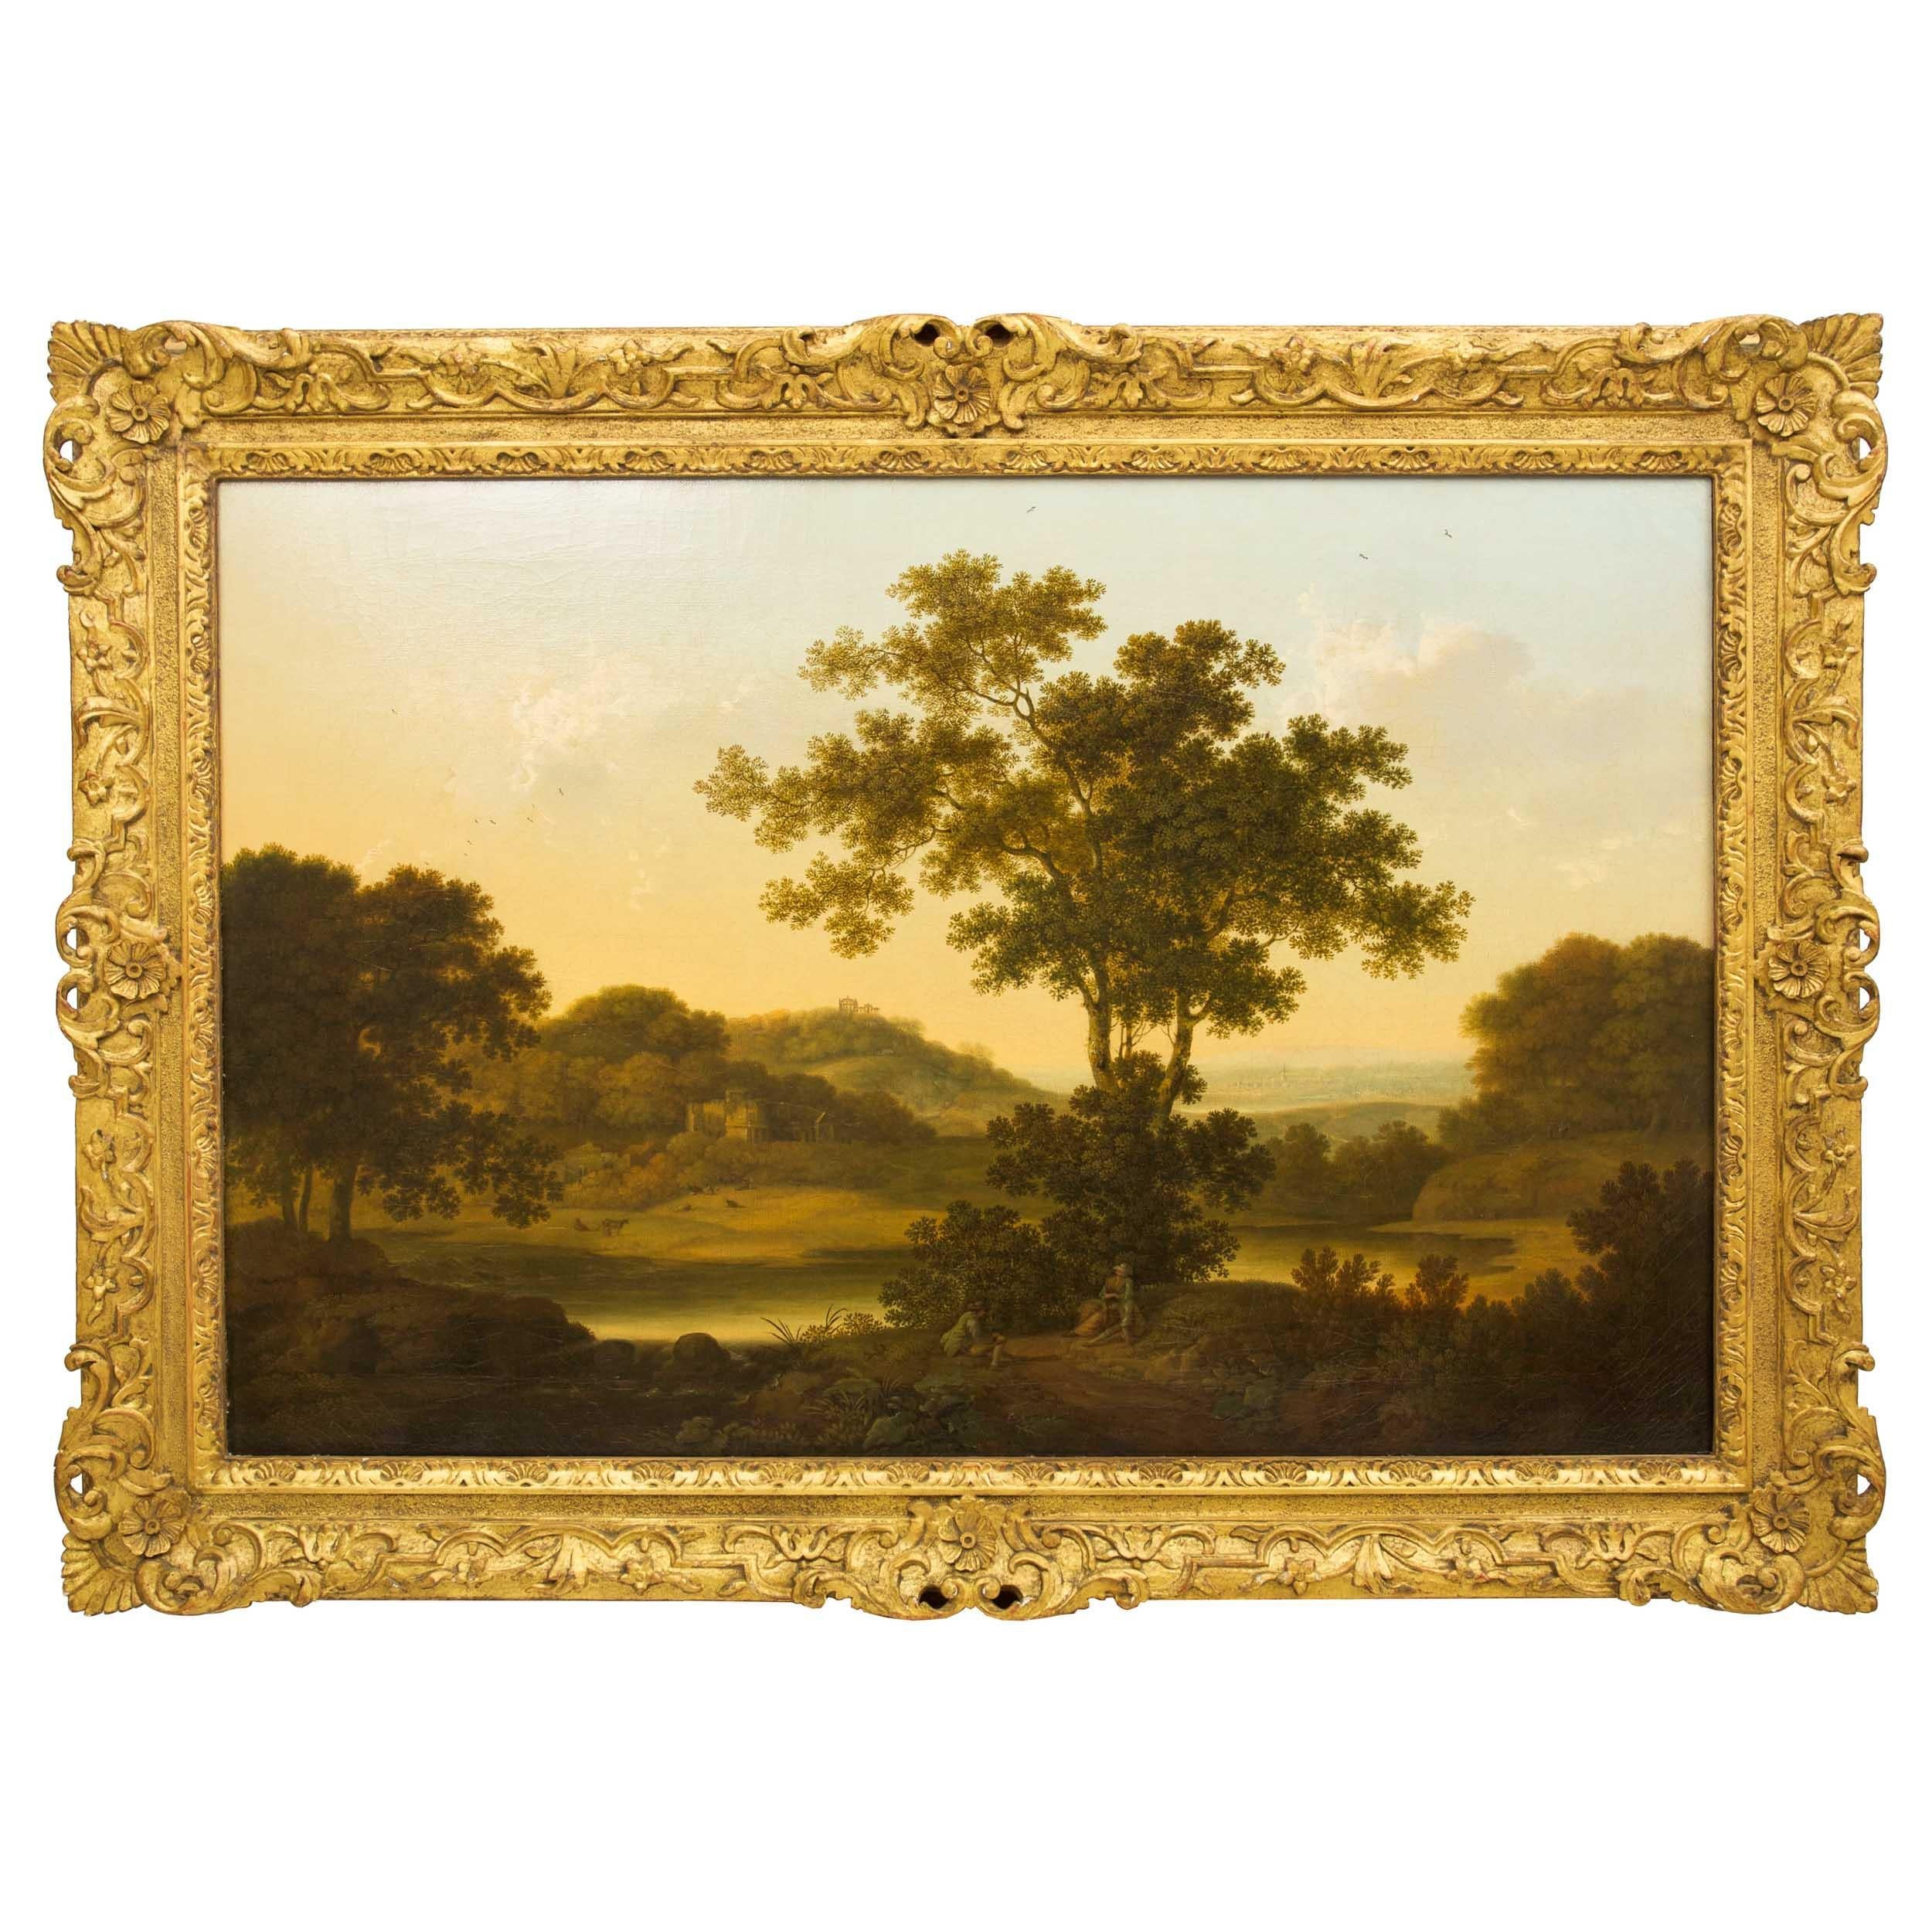 An exquisite sweeping view of a vast English countryside, this fine landscape painting by George Smith of Chichester captures three travelers at rest under the shade of trees along the banks of a river tumbling over rocks as it pools to the right